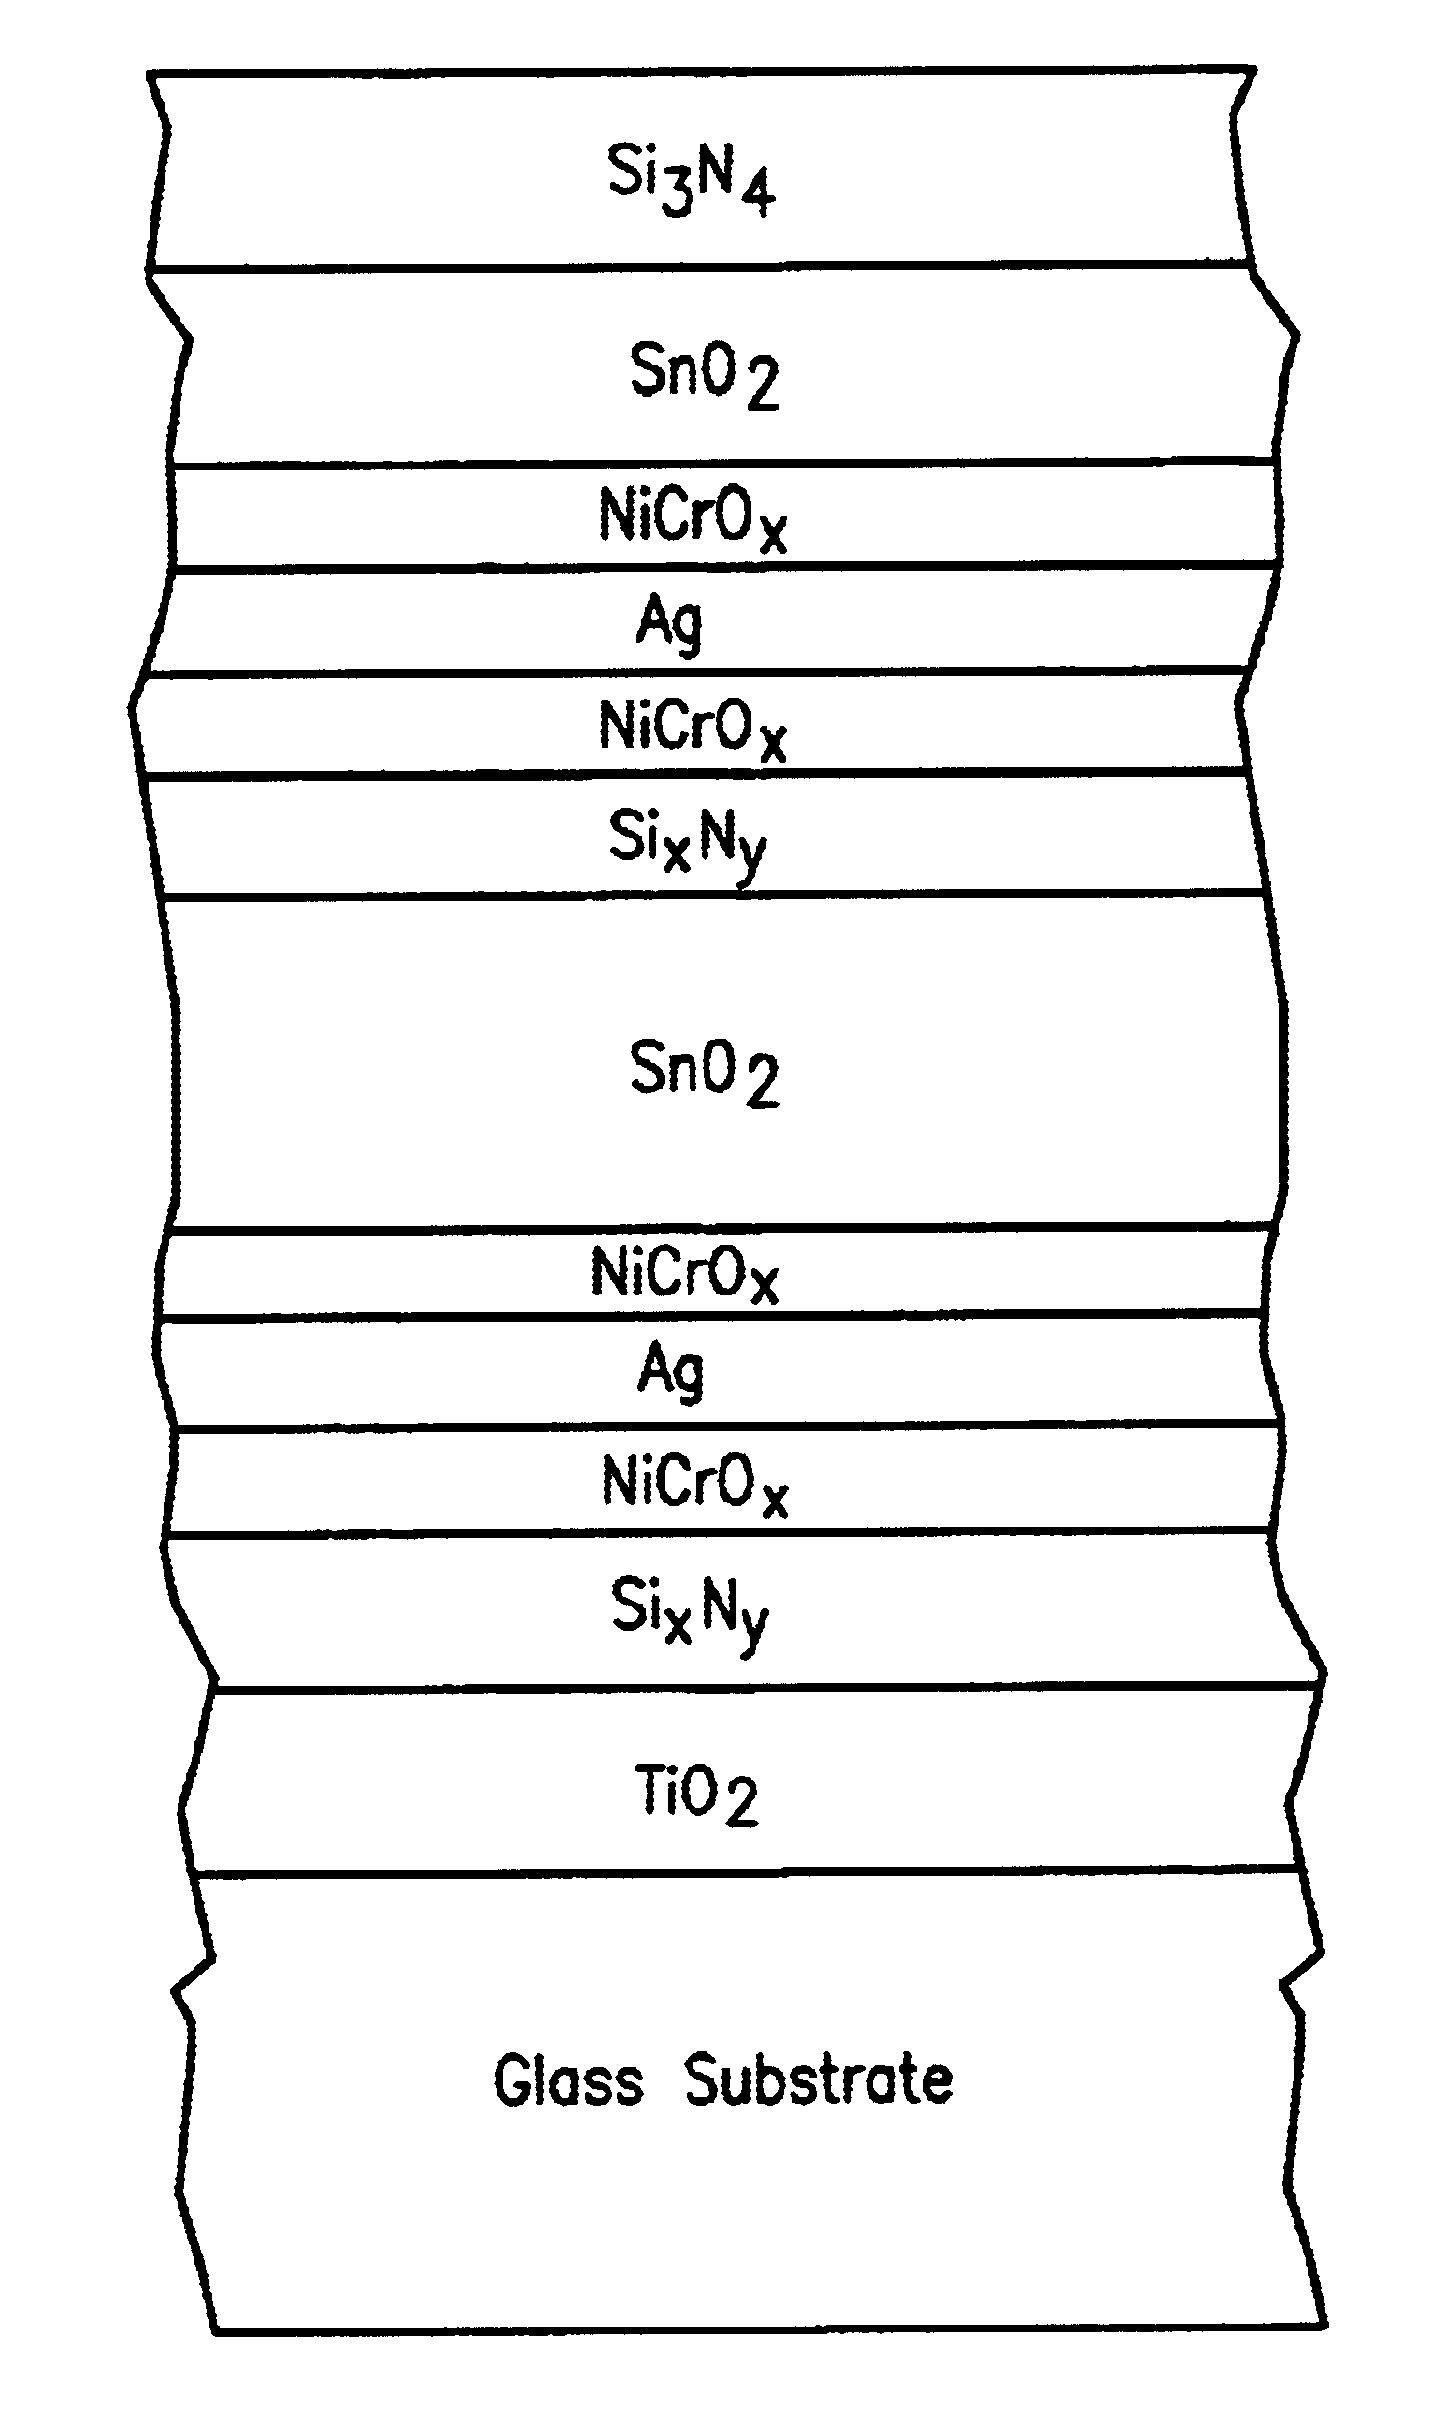 Low-e coating with high visible transmission